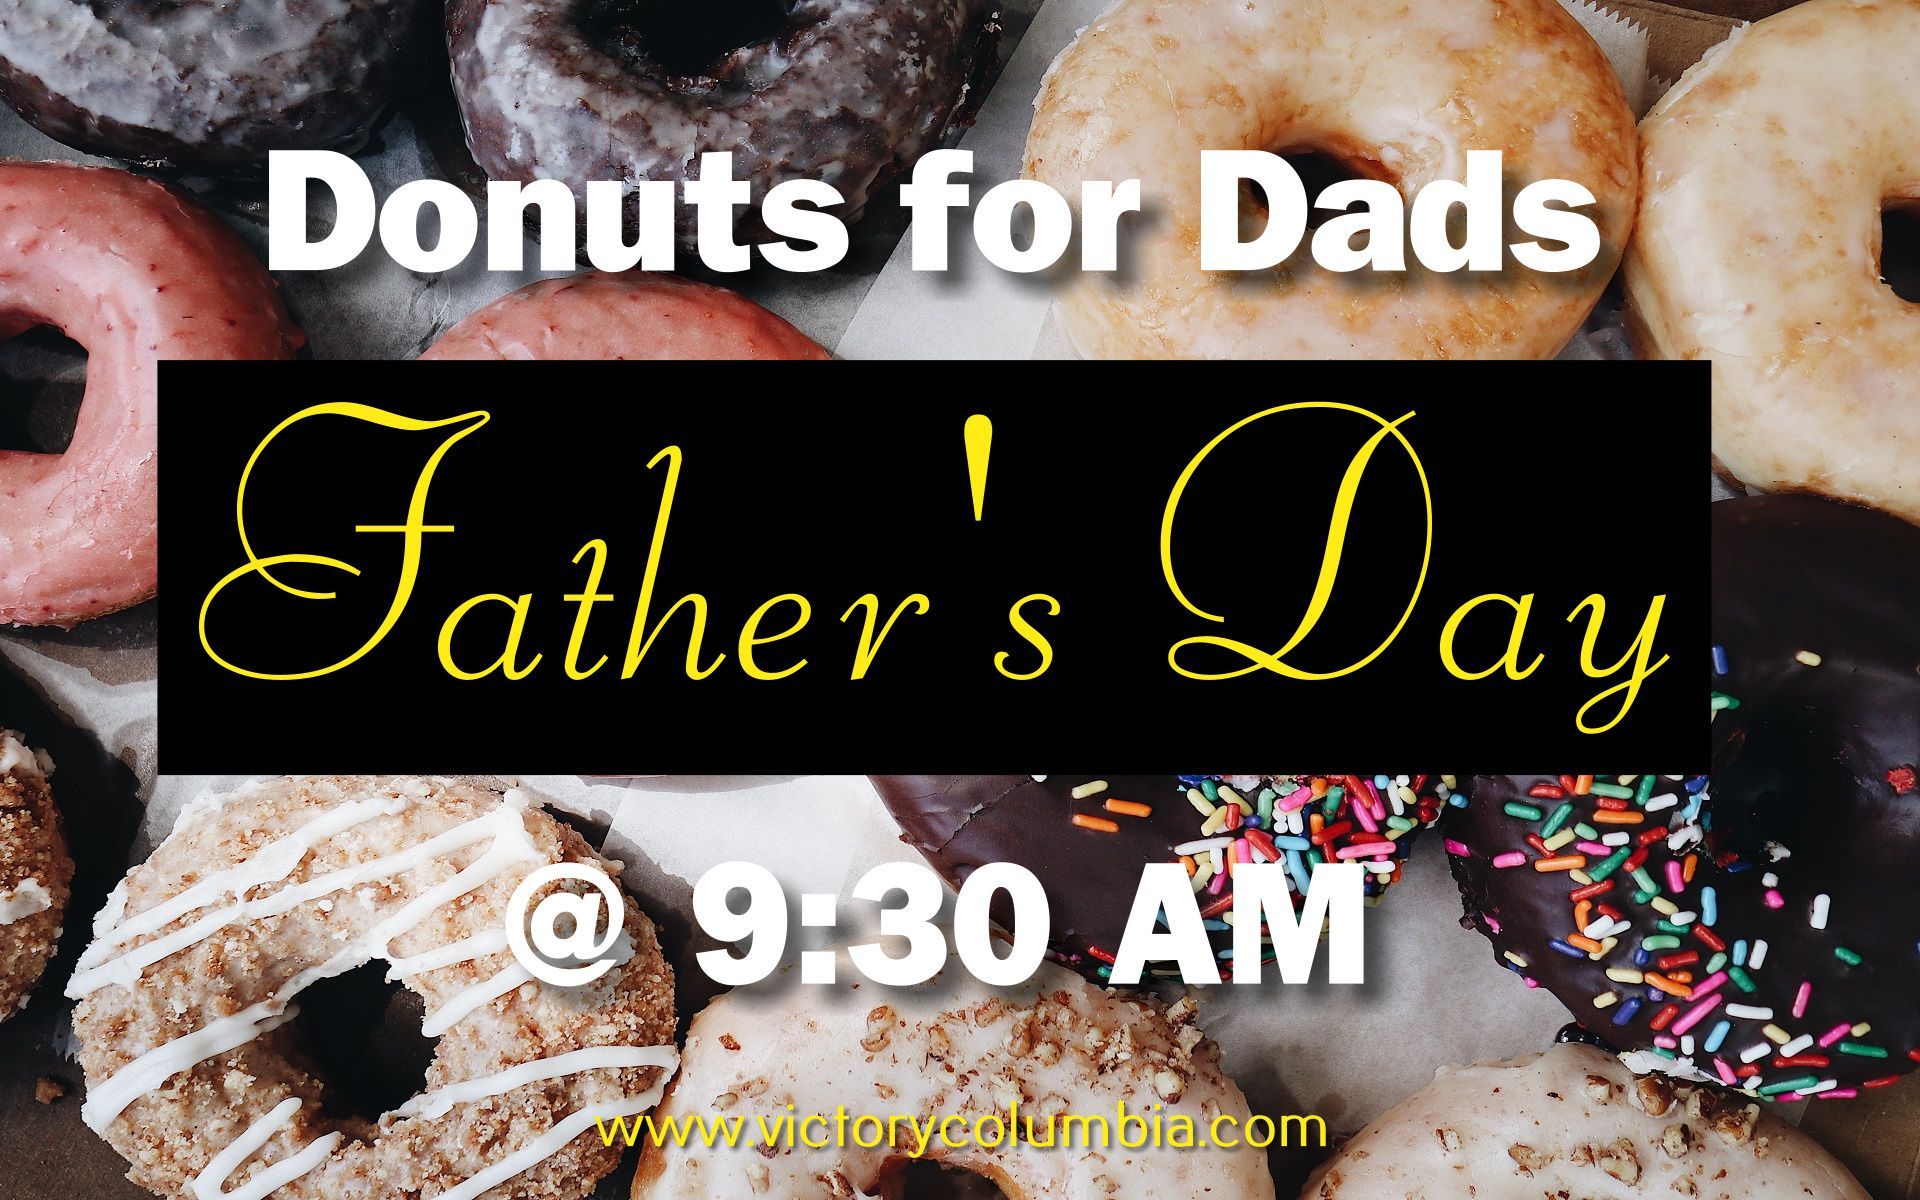 Victory Church | Joins Us for Donuts for Dads on Father's Day!